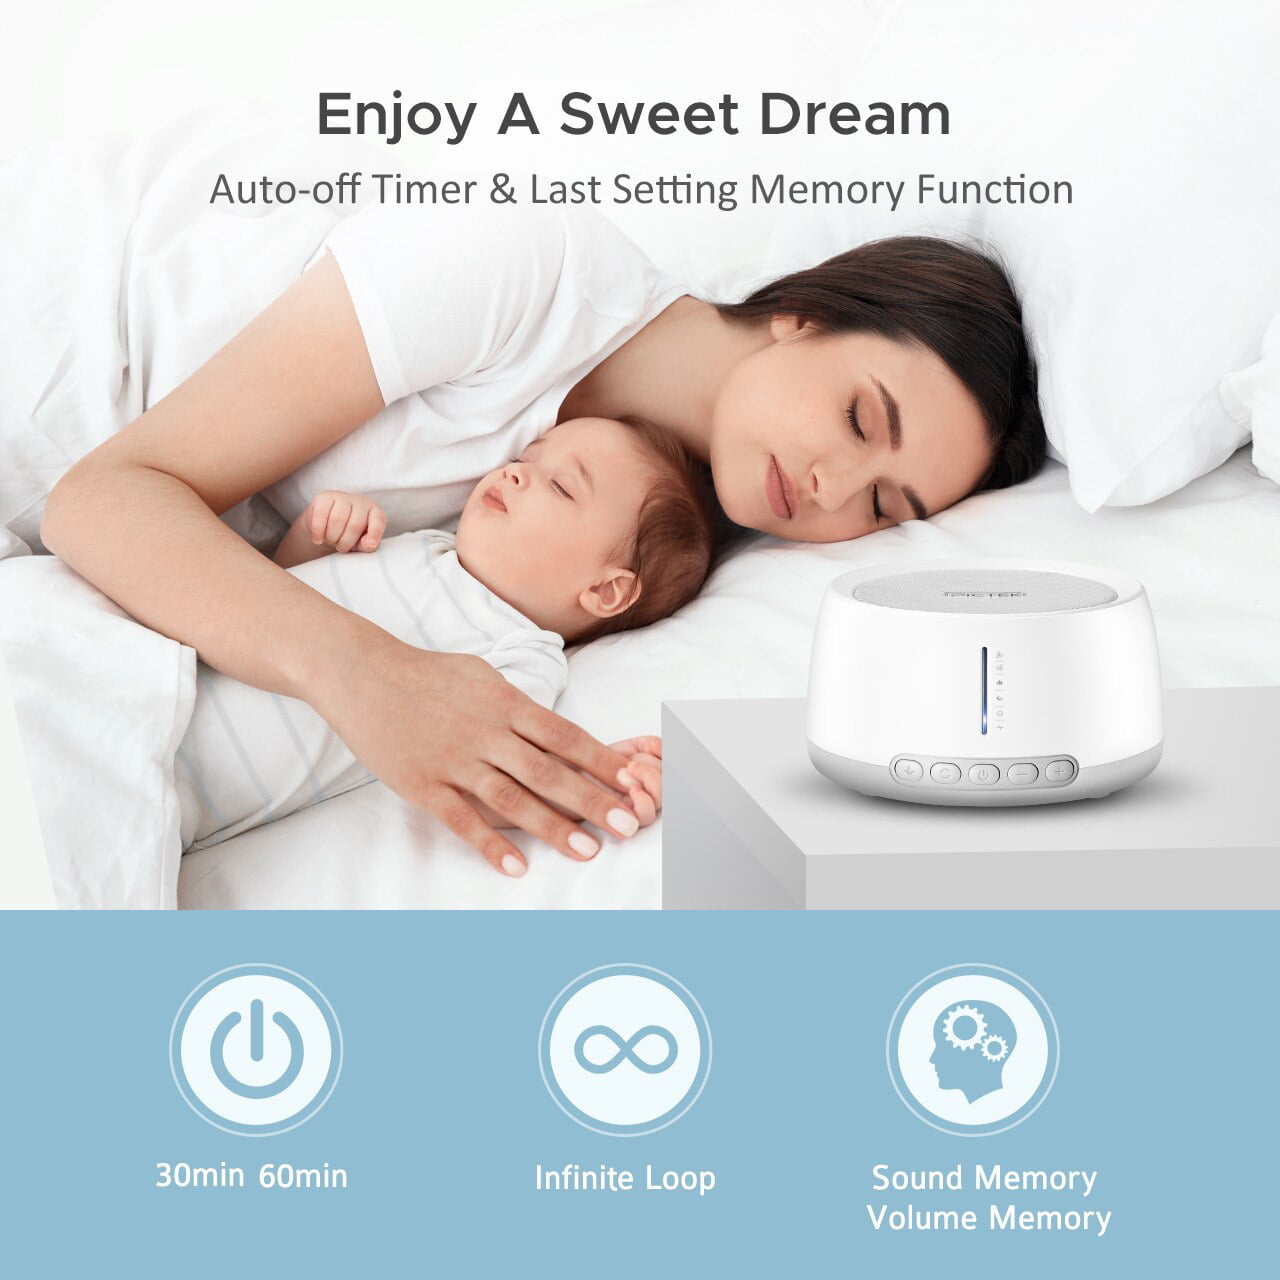 Adapter Not Included Up to 100dB PICTEK White Noise Machine USB Powered Sound Therapy 3 Auto-Off Timer & Memory Function 30 Non-Looping Soothing Sound Machine for Nursery Office Privacy